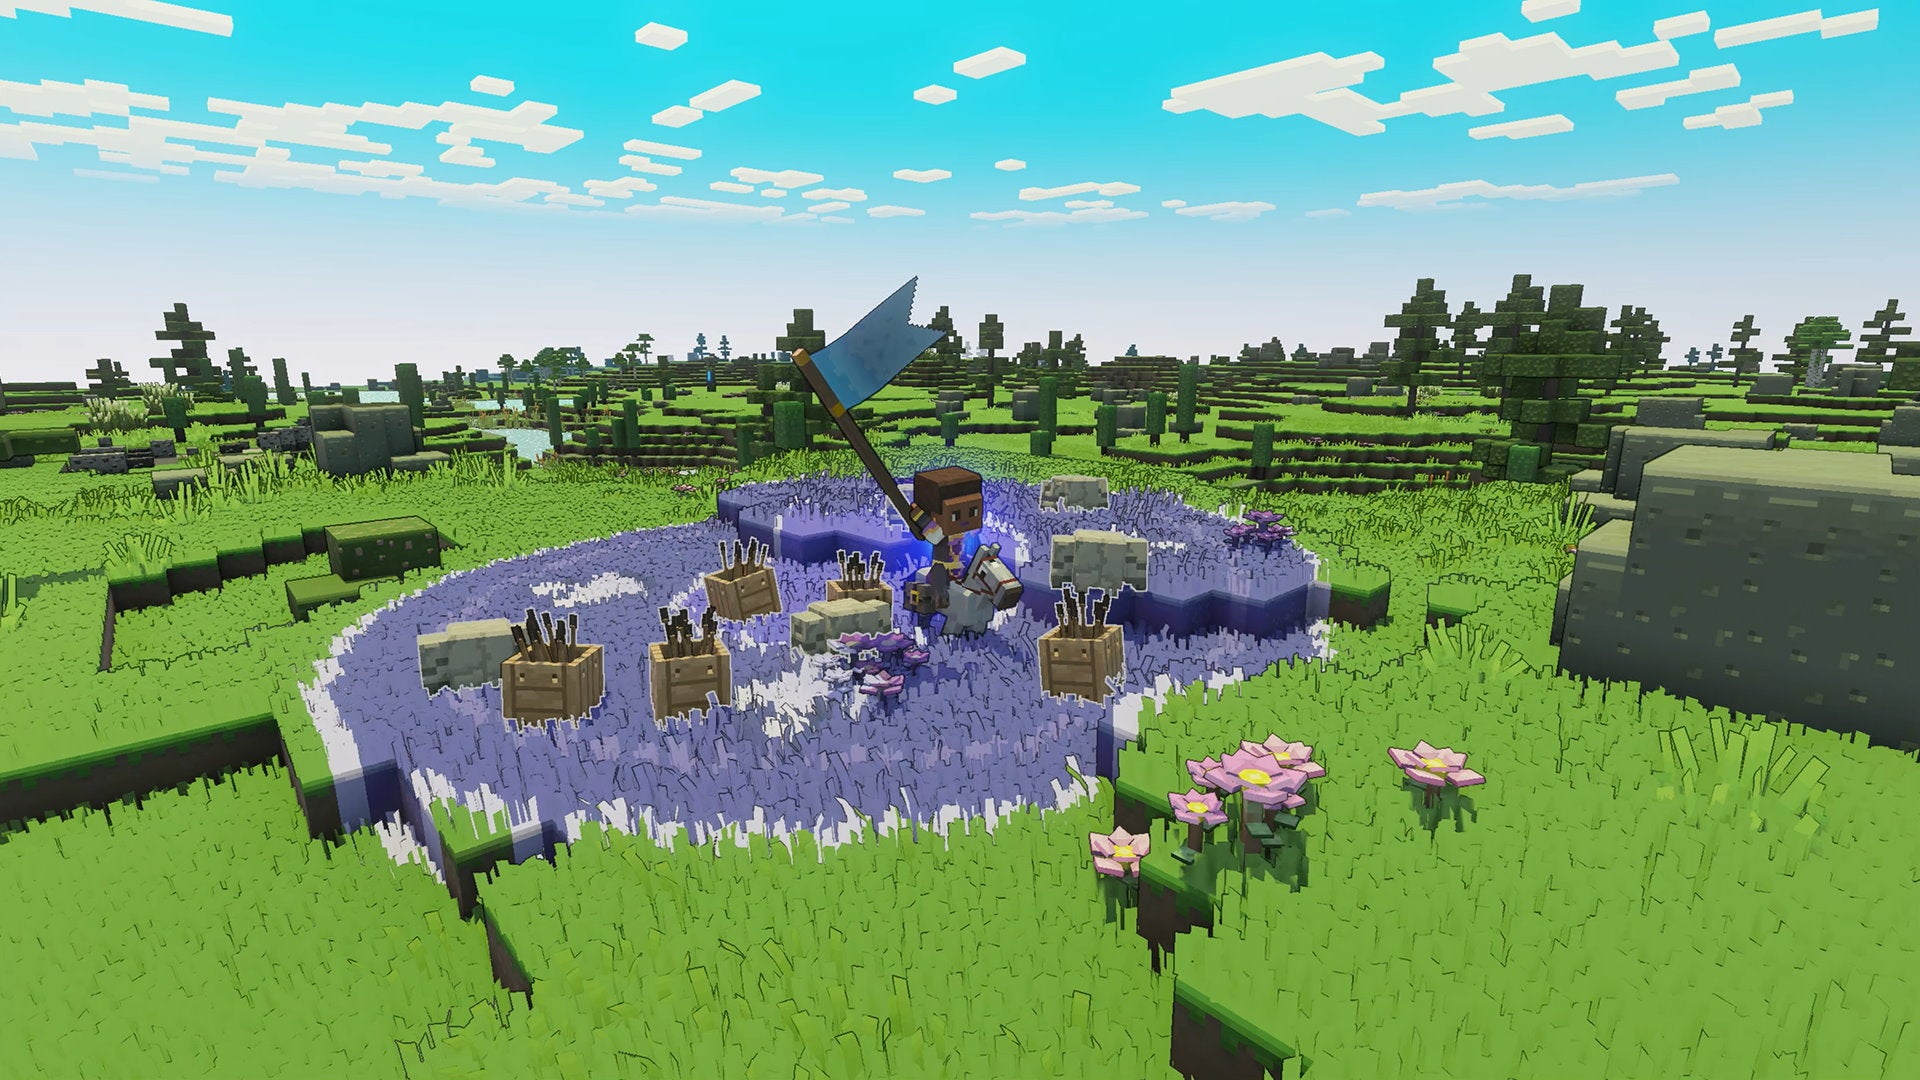 A warrior raises a flag surrounded by boxes of arrows in a grassy field in Minecraft Legends